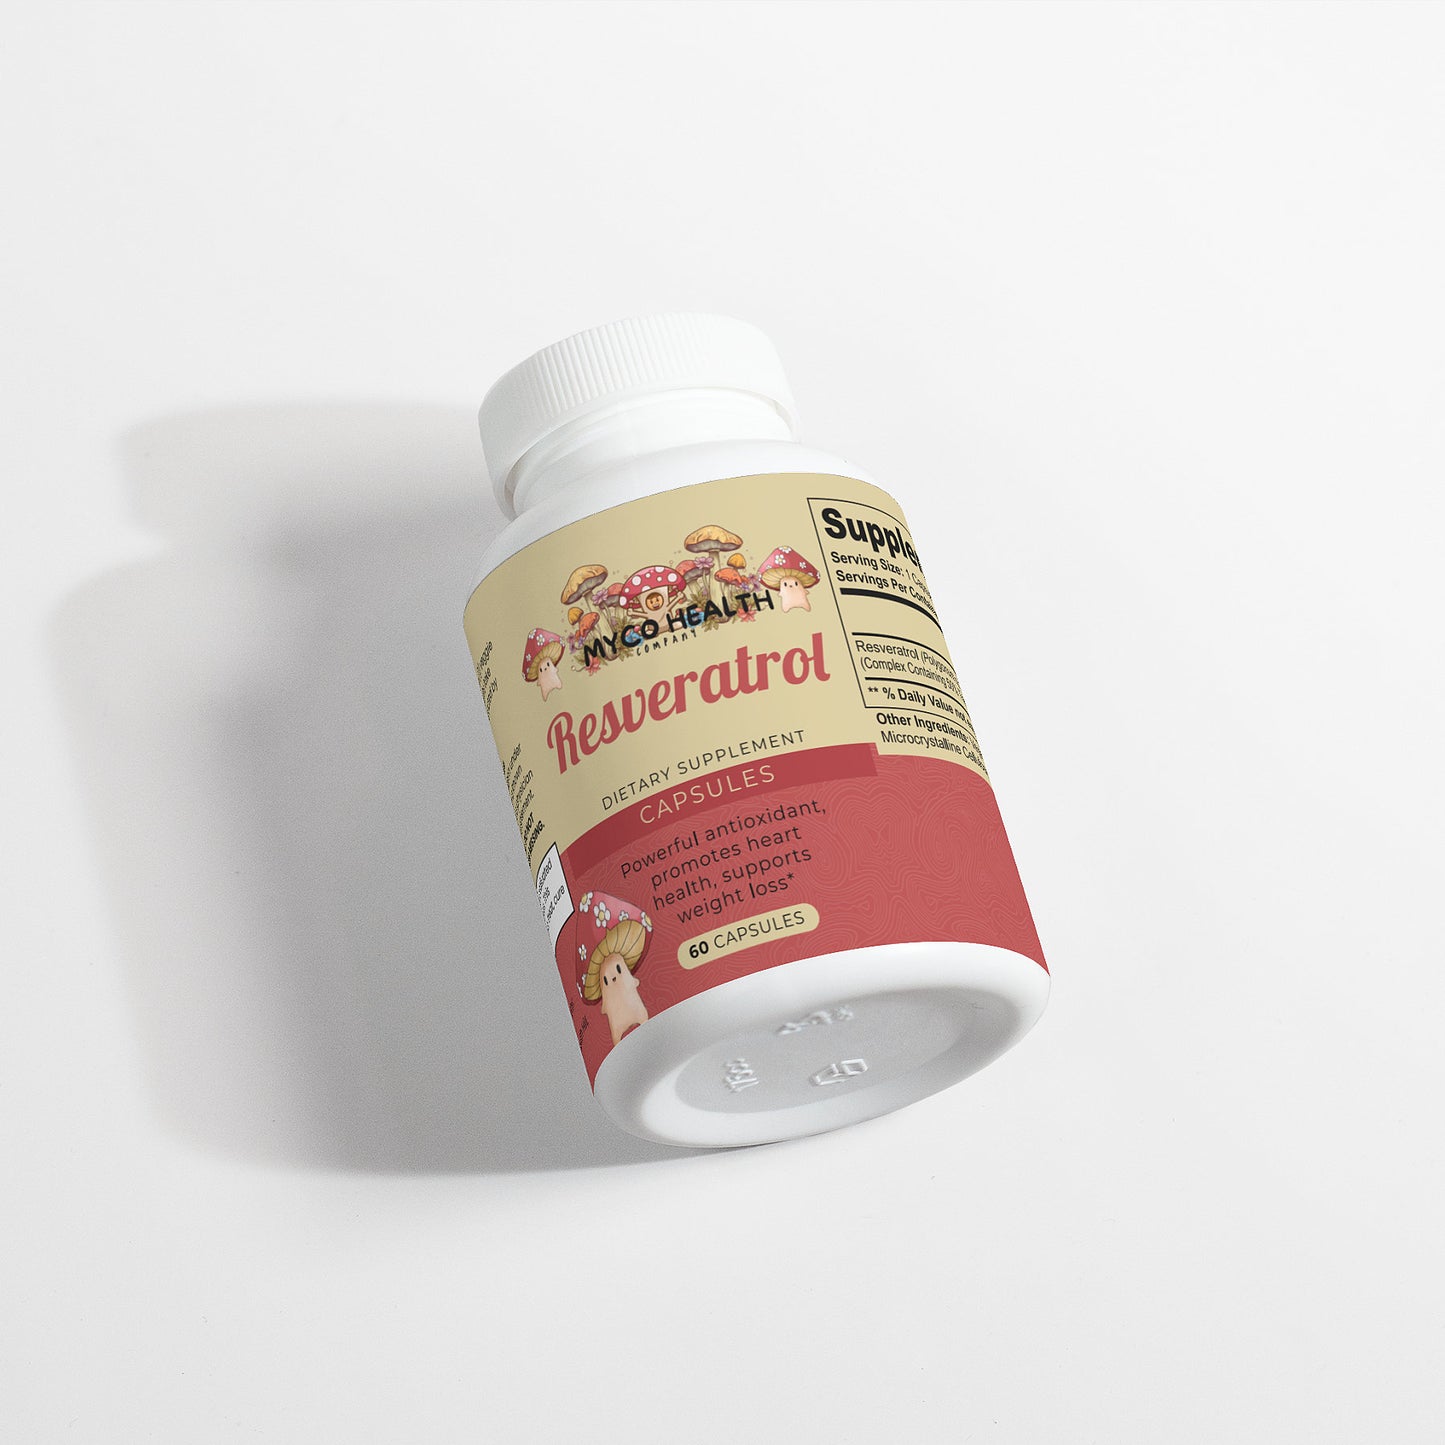 Resveratrol: For Wellness and Healthy Lifestyle